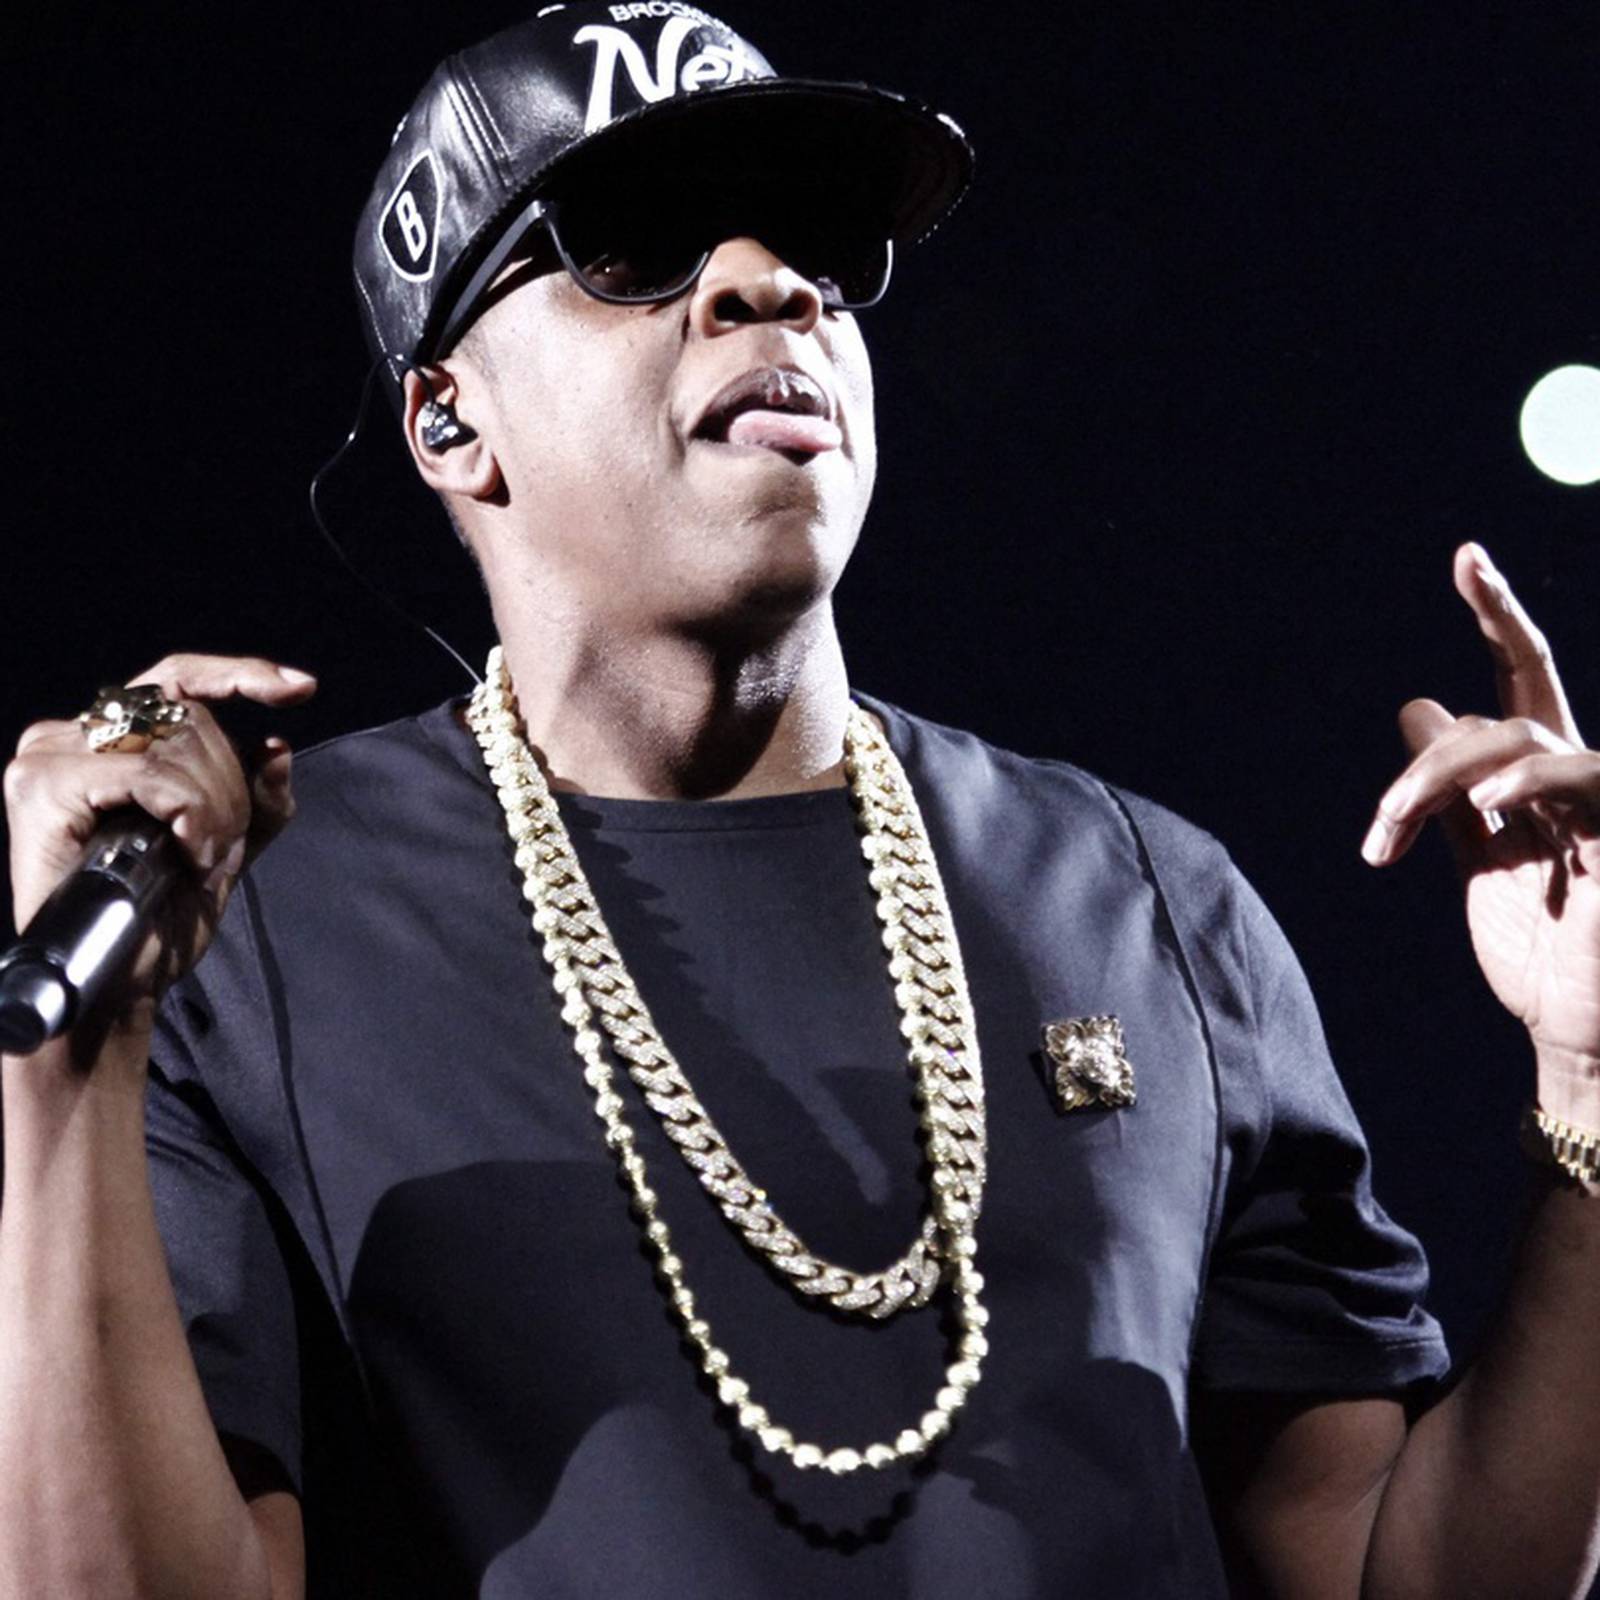 LVMH Moët Hennessy Louis Vuitton purchases stake in Jay-Z's champagne brand  